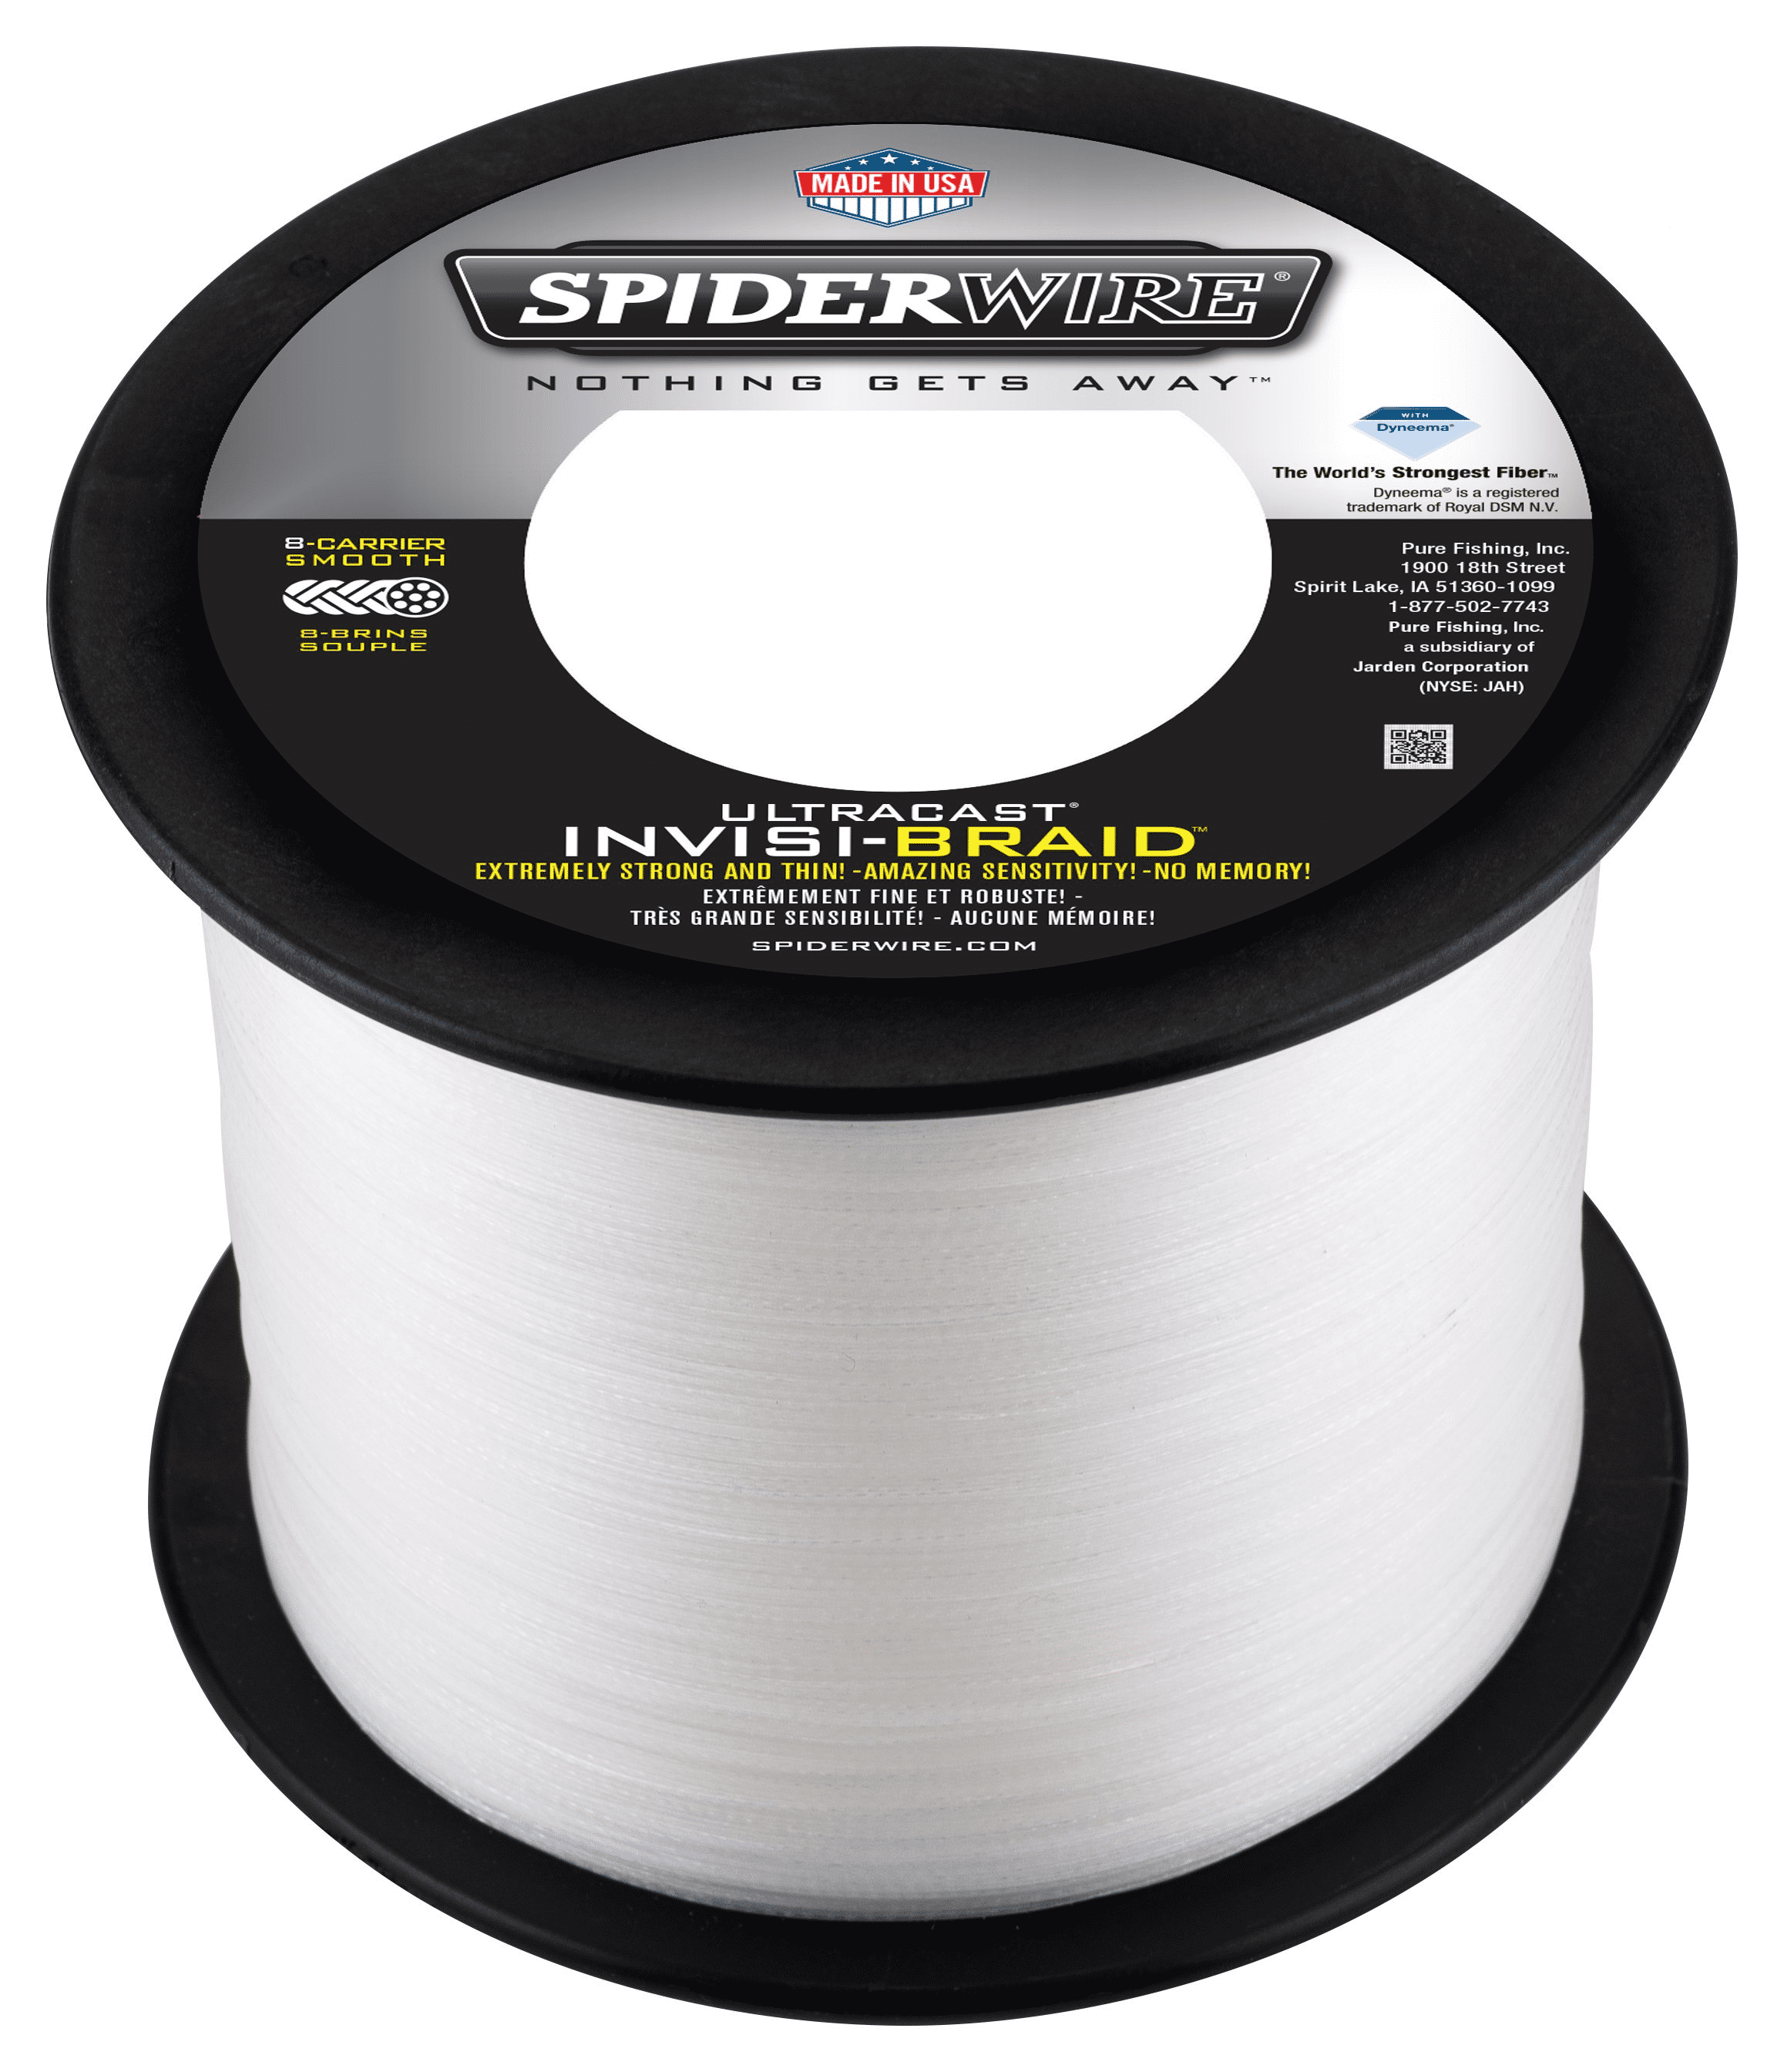 SPIDERWIRE 8xStrand ULTRACAST INVISI-BRAID In Spools of 300yds (Made in USA)